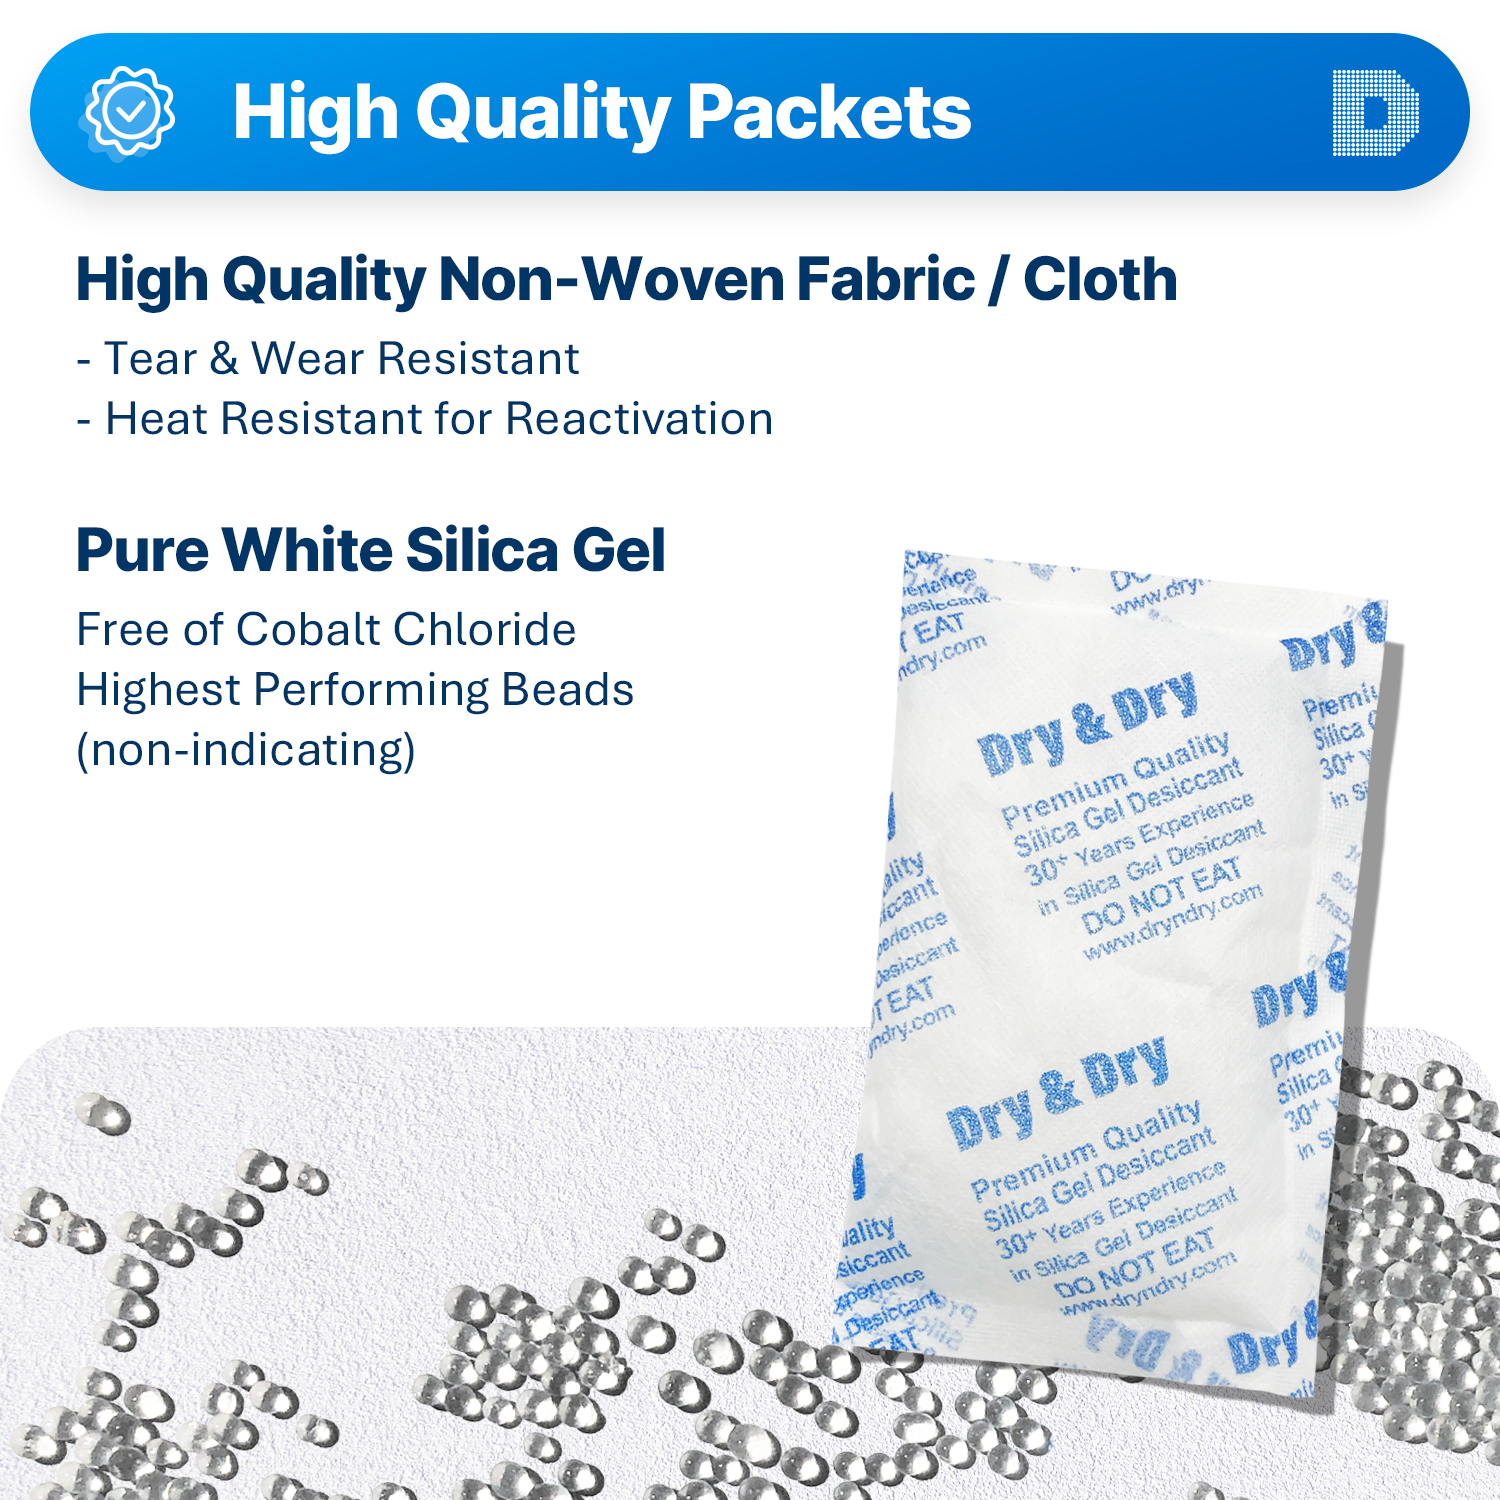 100 Gram [200 Packets]  "Dry & Dry" Premium Silica Gel Desiccant Packets - Rechargeable Non-Woven Fabric (Cloth)